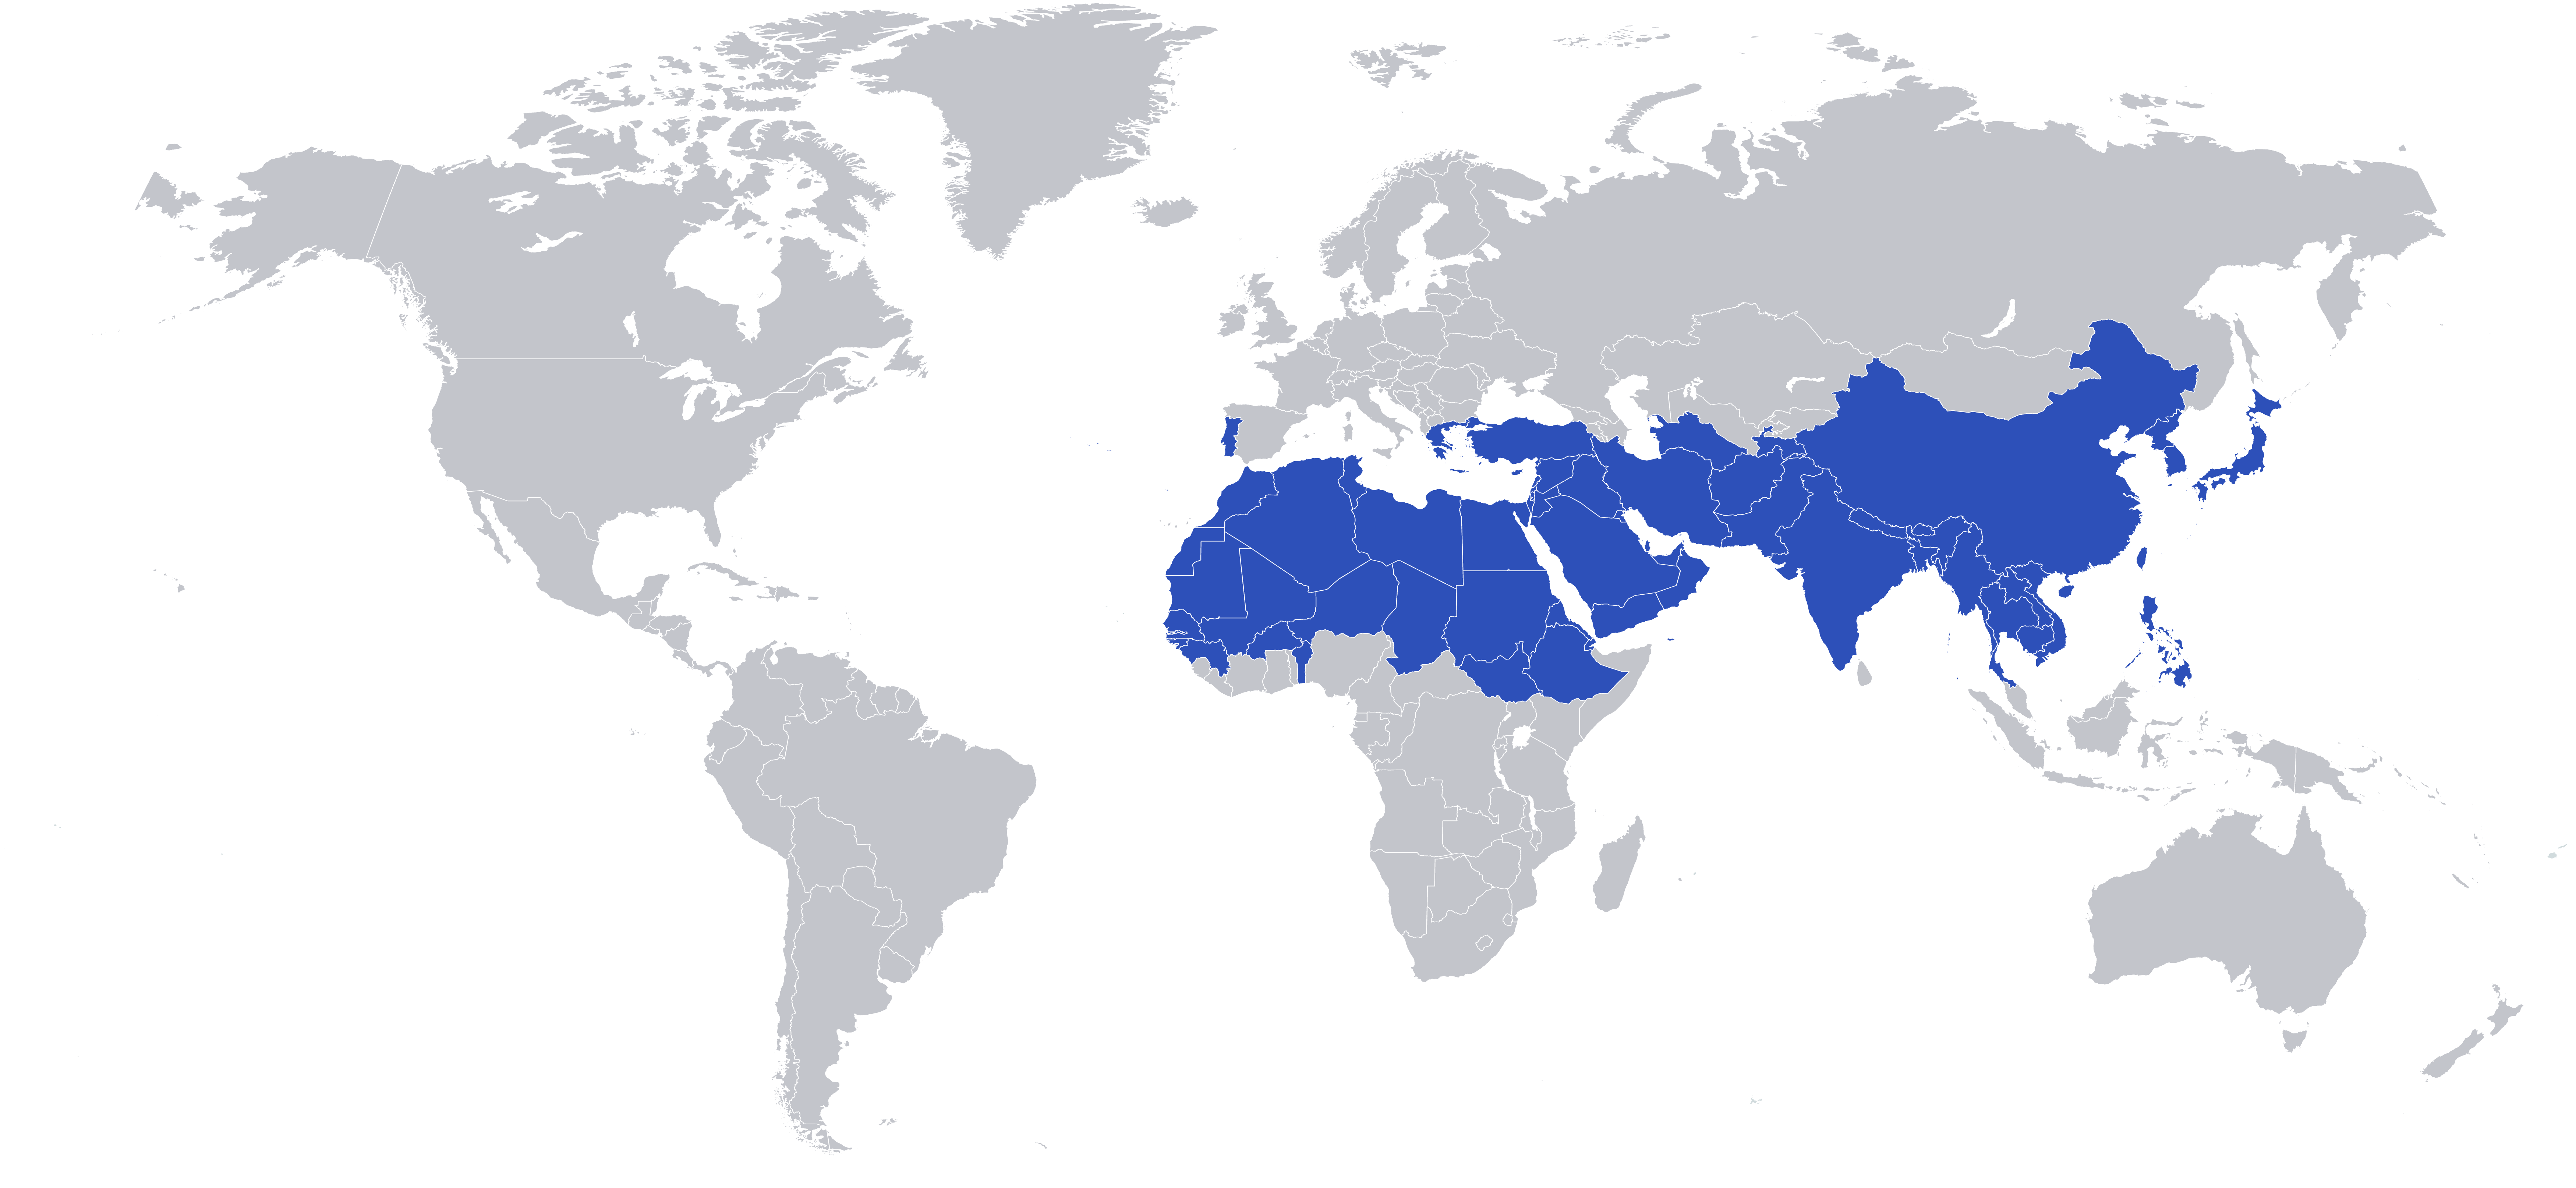 the 1040 window highlighted in blue on a world map